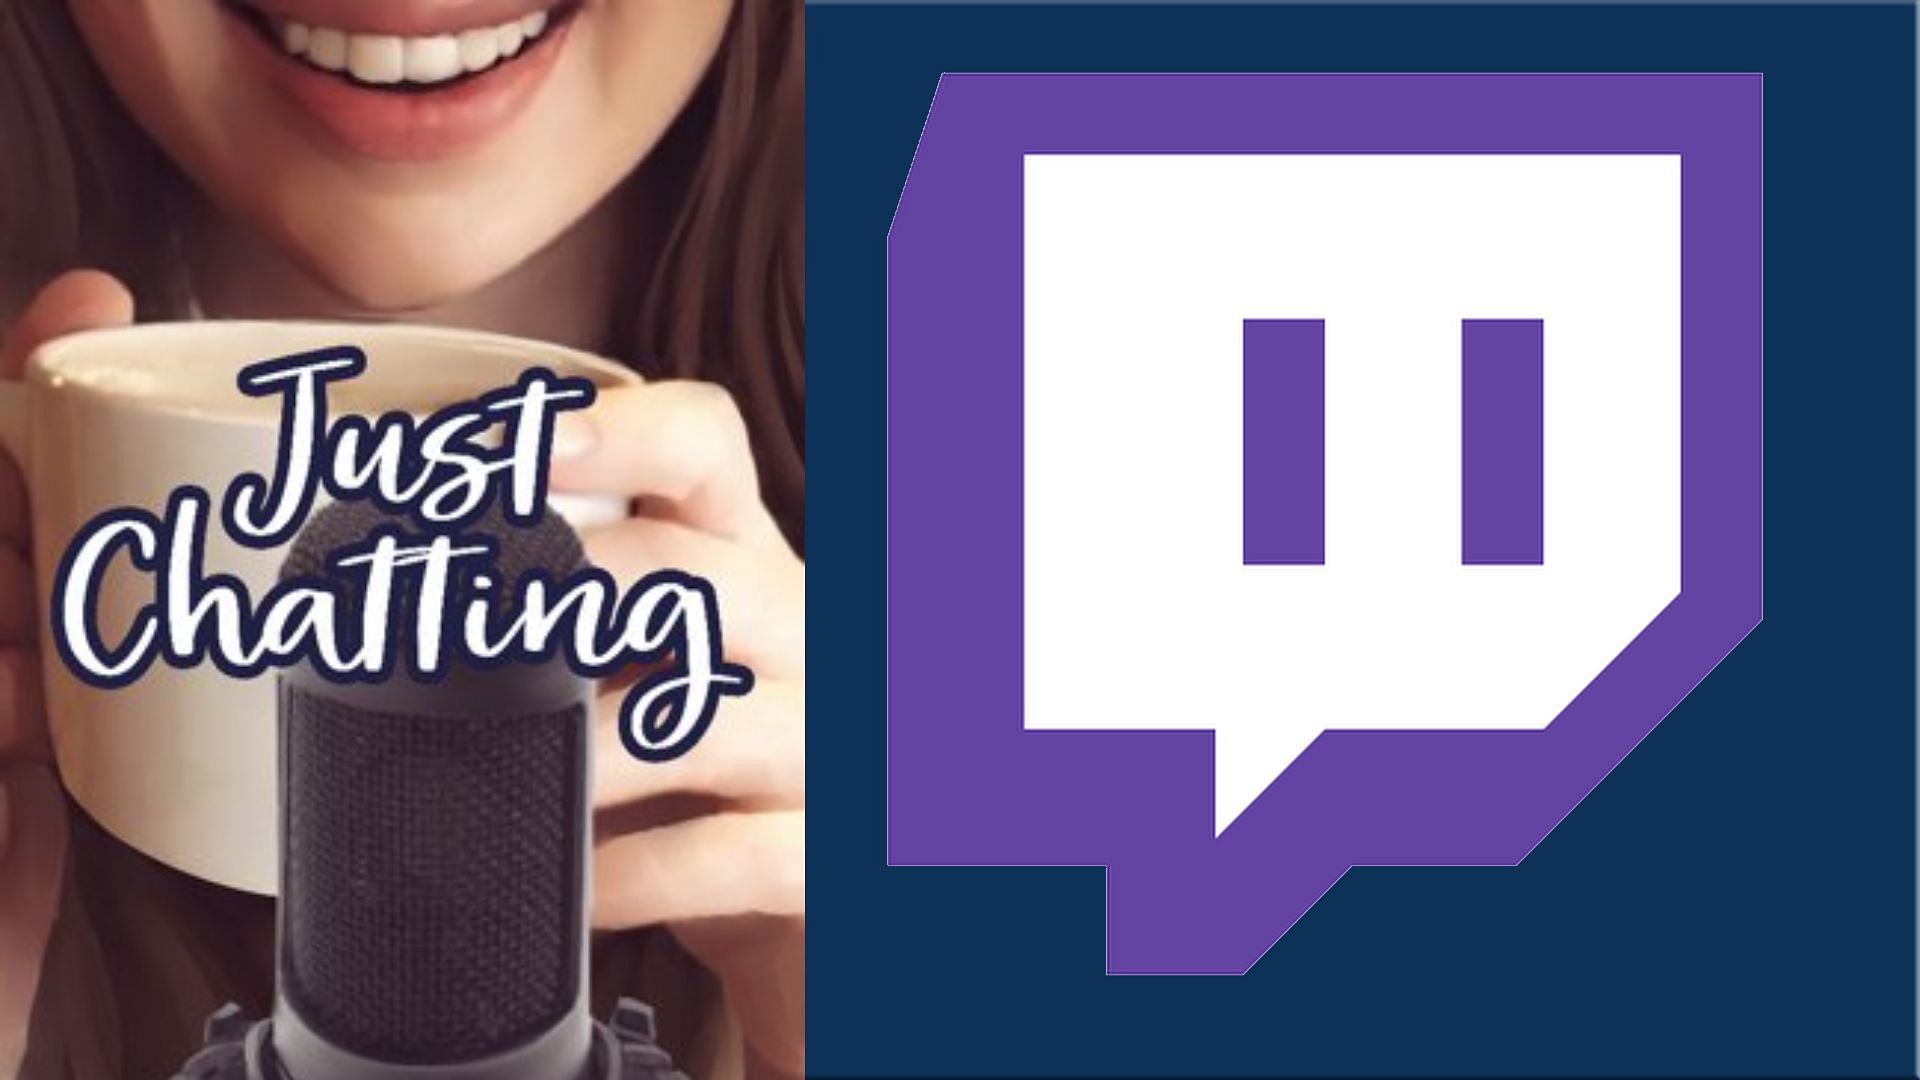 The Just Chatting category dominated Twitch in 2022 (Image via Sportskeeda)